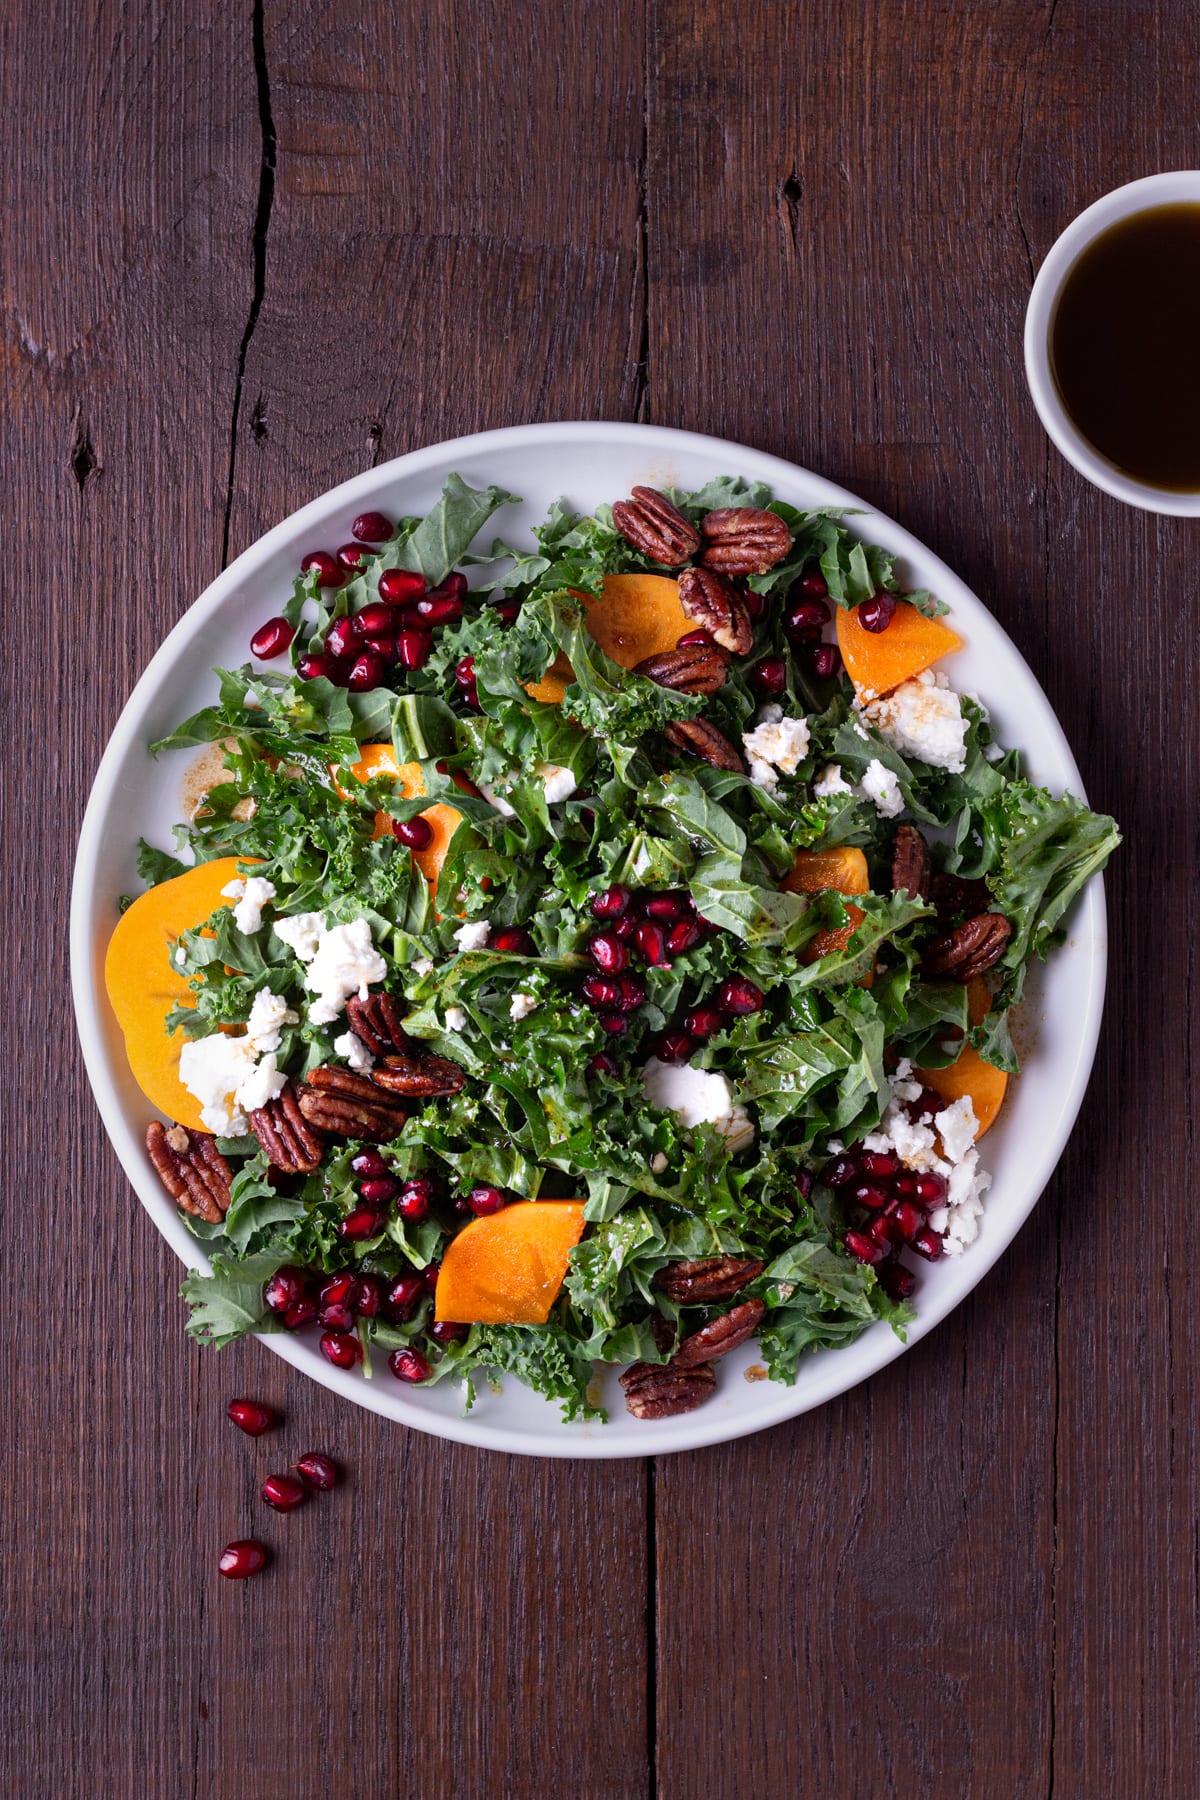 Overhead shot of a plate of kale salad with pomegranates, persimmons, pecans and feta cheese.